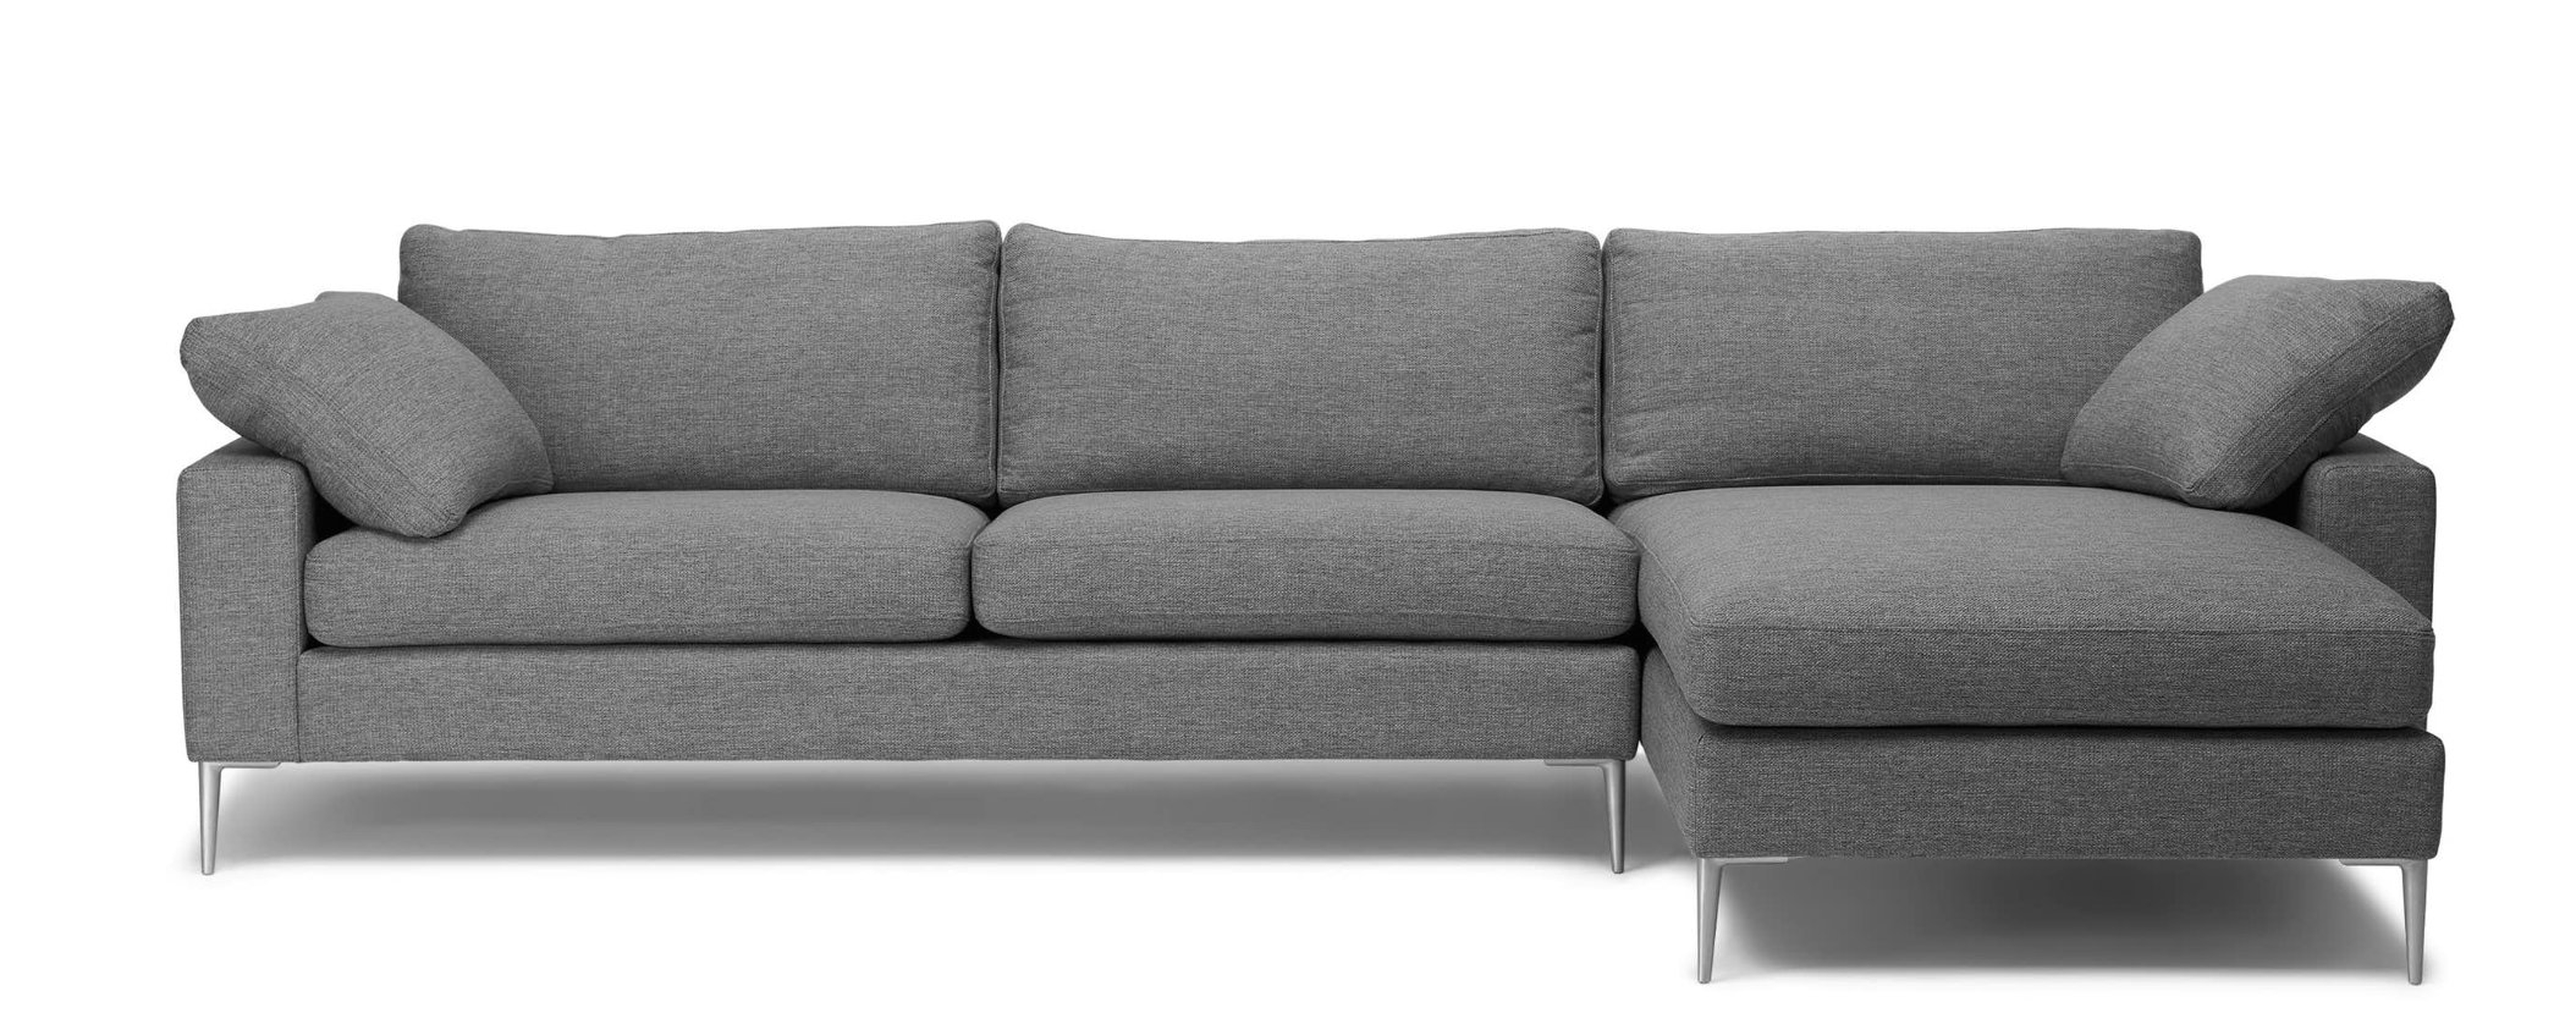 NOVA  - Gravel Gray sectional right chaise - Article